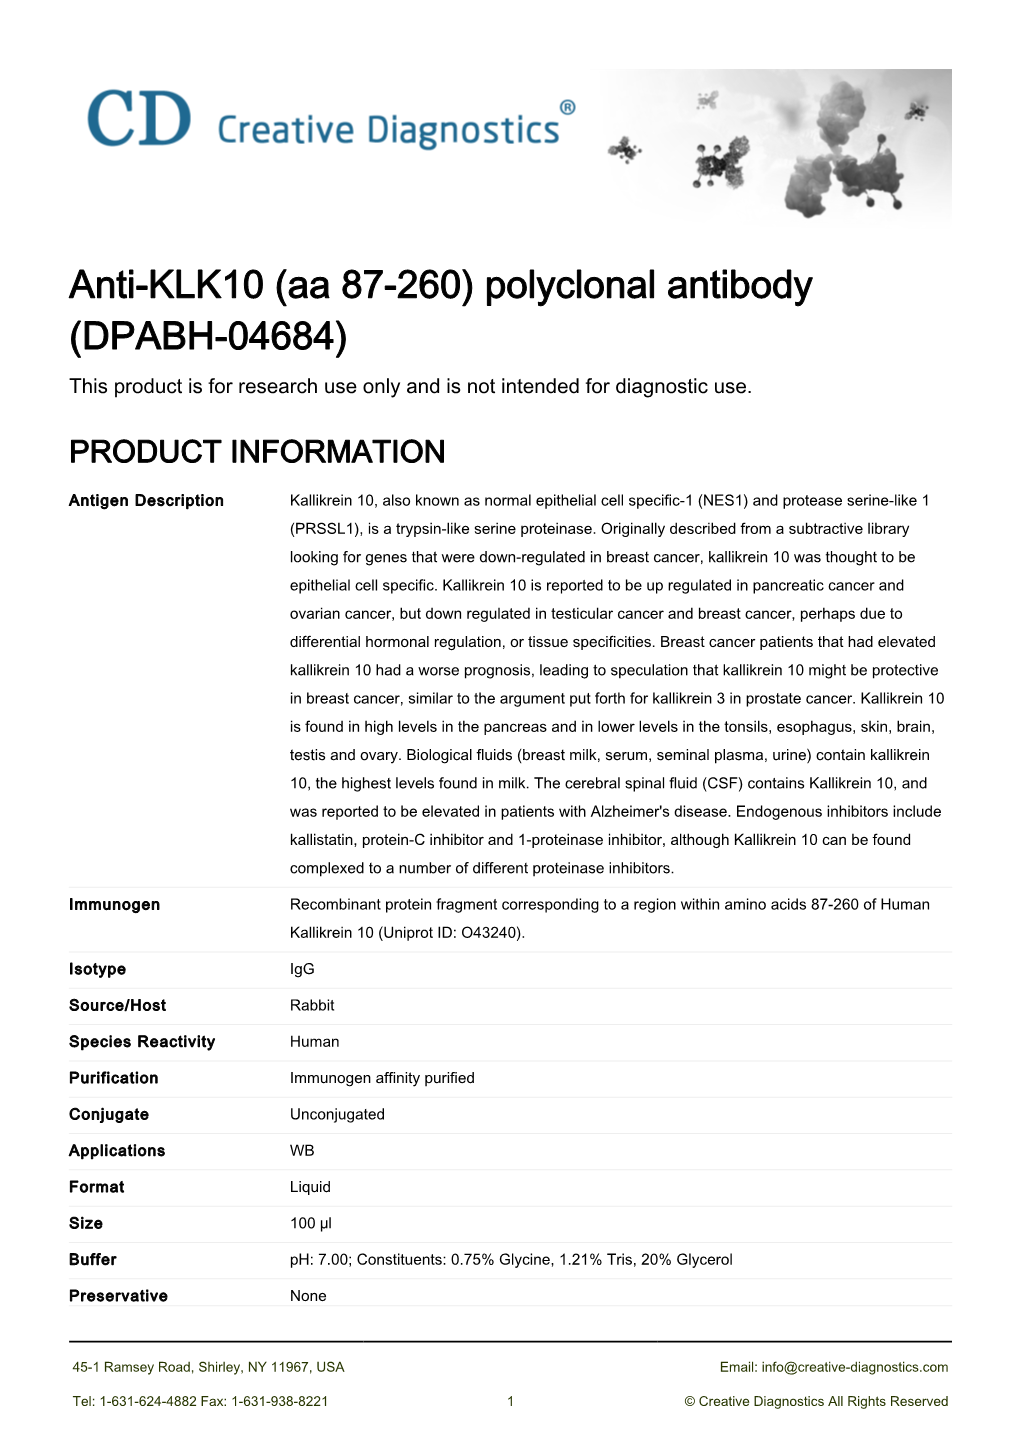 Anti-KLK10 (Aa 87-260) Polyclonal Antibody (DPABH-04684) This Product Is for Research Use Only and Is Not Intended for Diagnostic Use